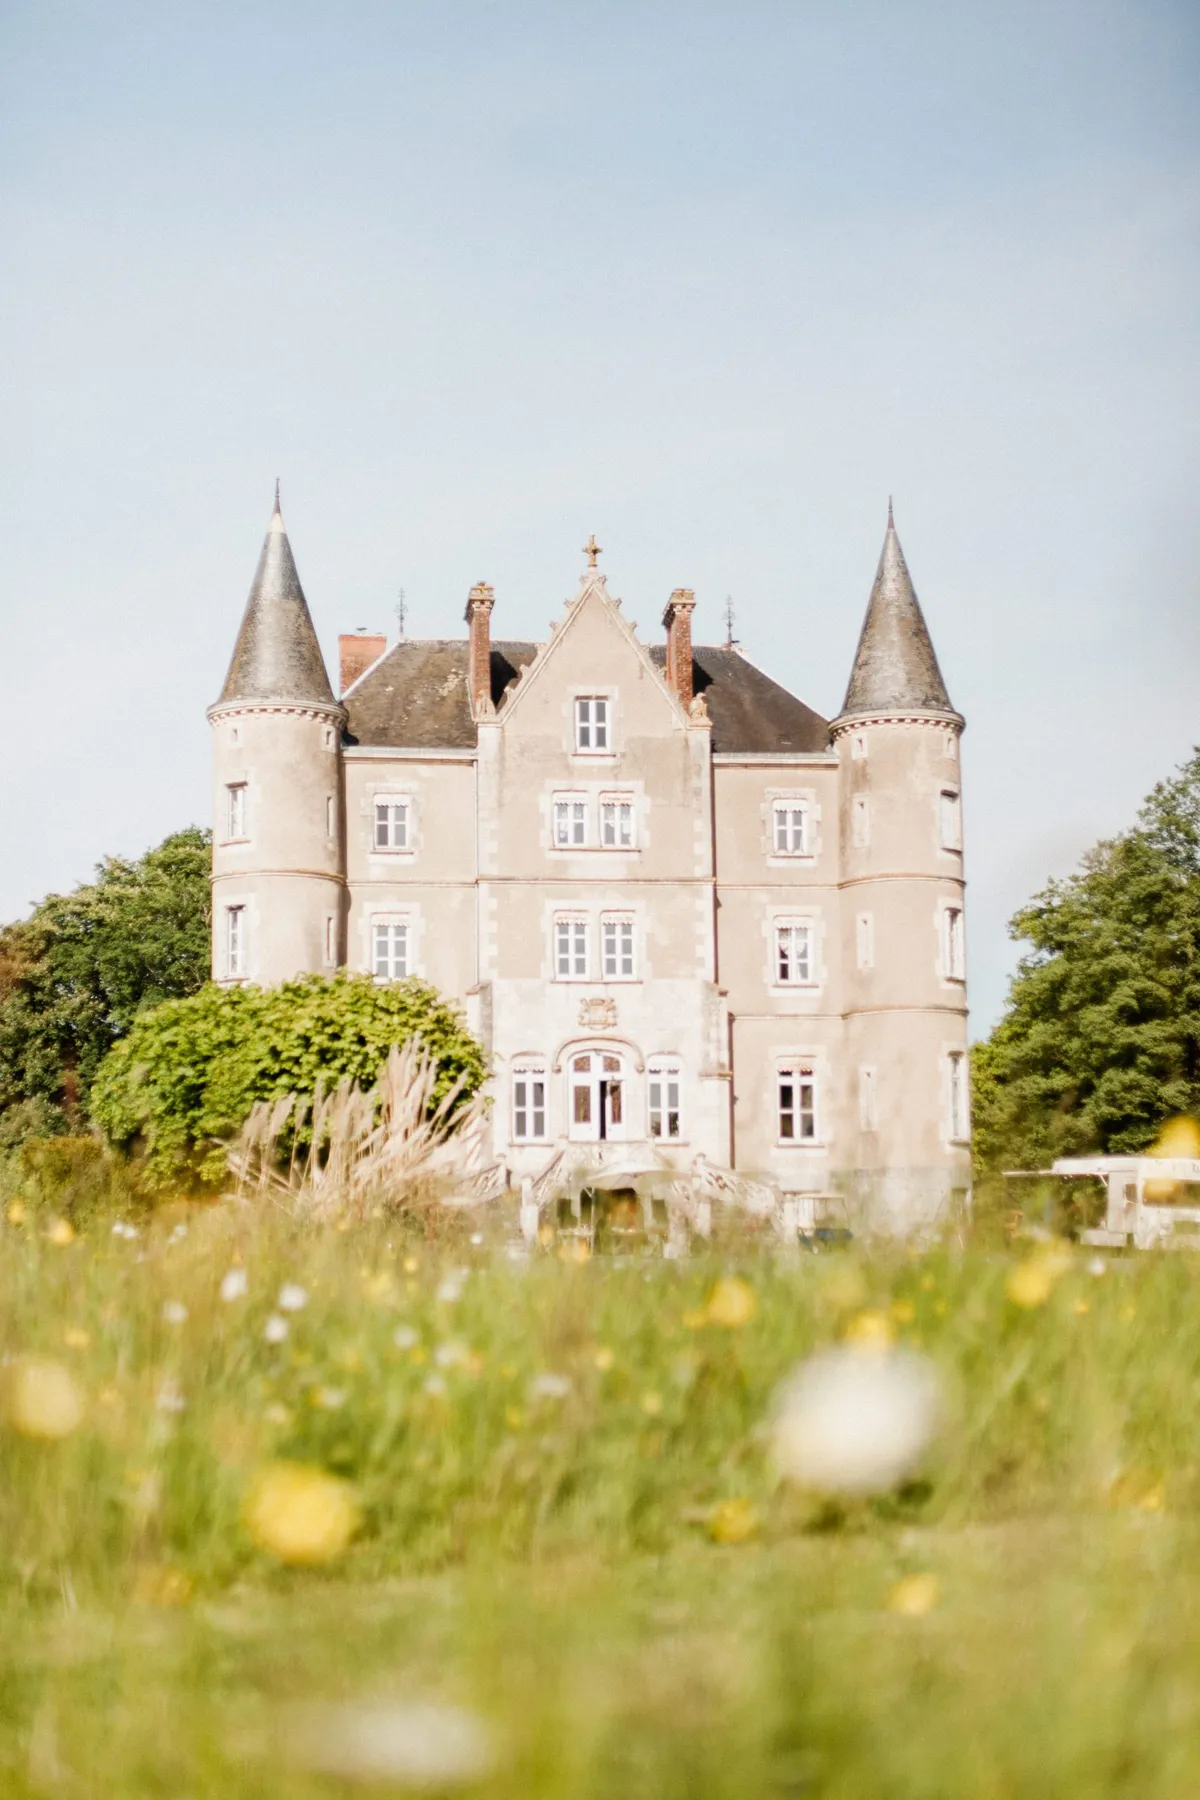 The Chateau exterior CREDIT Claire Macintyre Photography